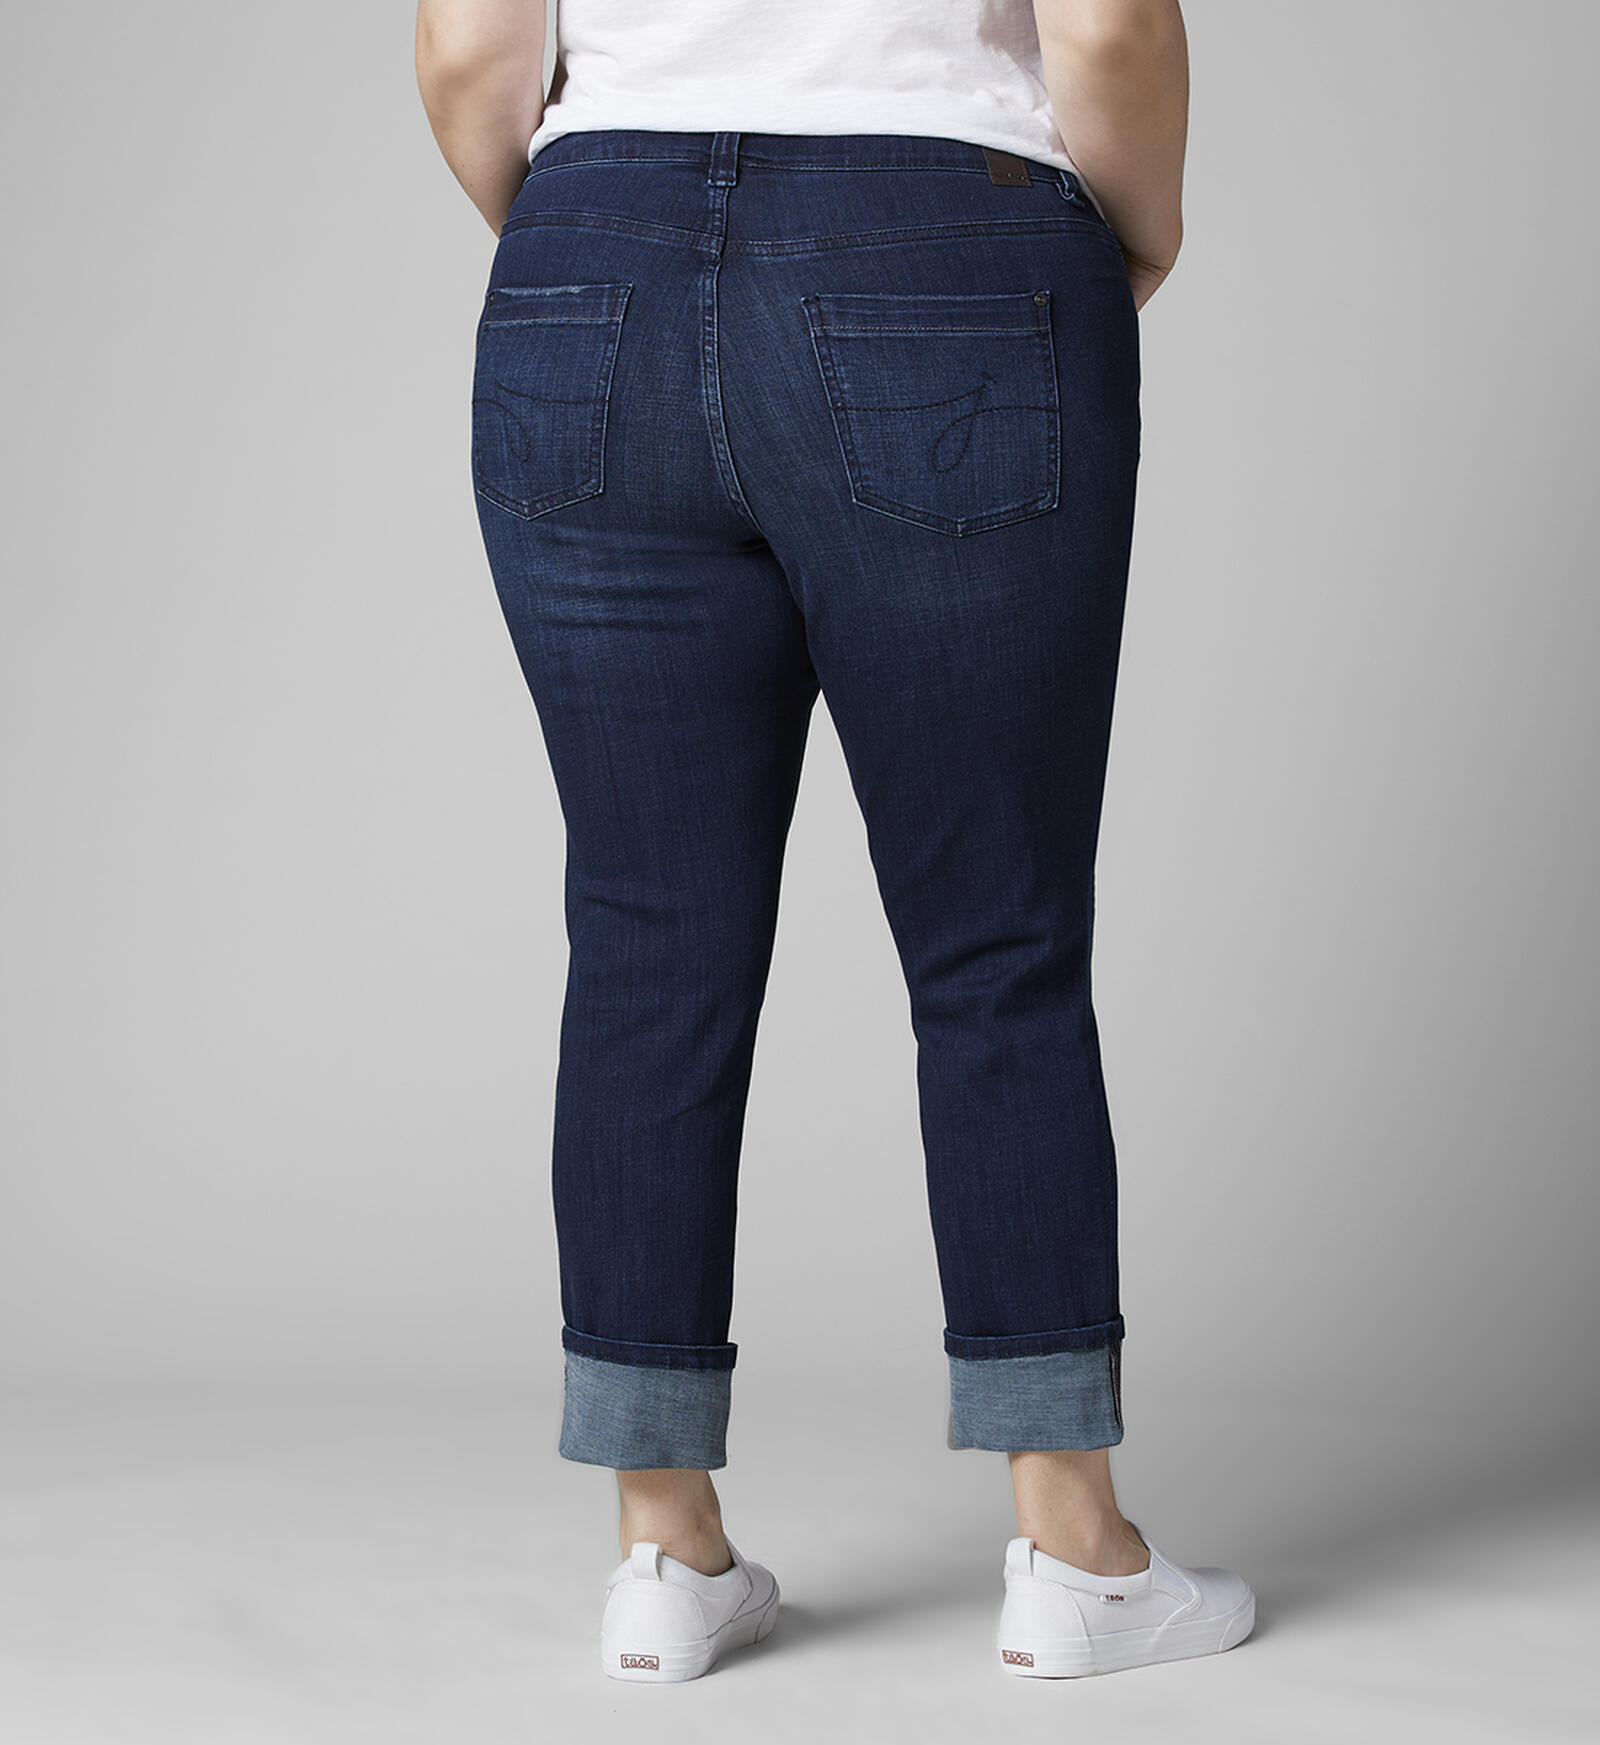 Buy Maddie Mid Rise Skinny Cuffed Jeans Plus Size for USD  | Jag Jeans  US New